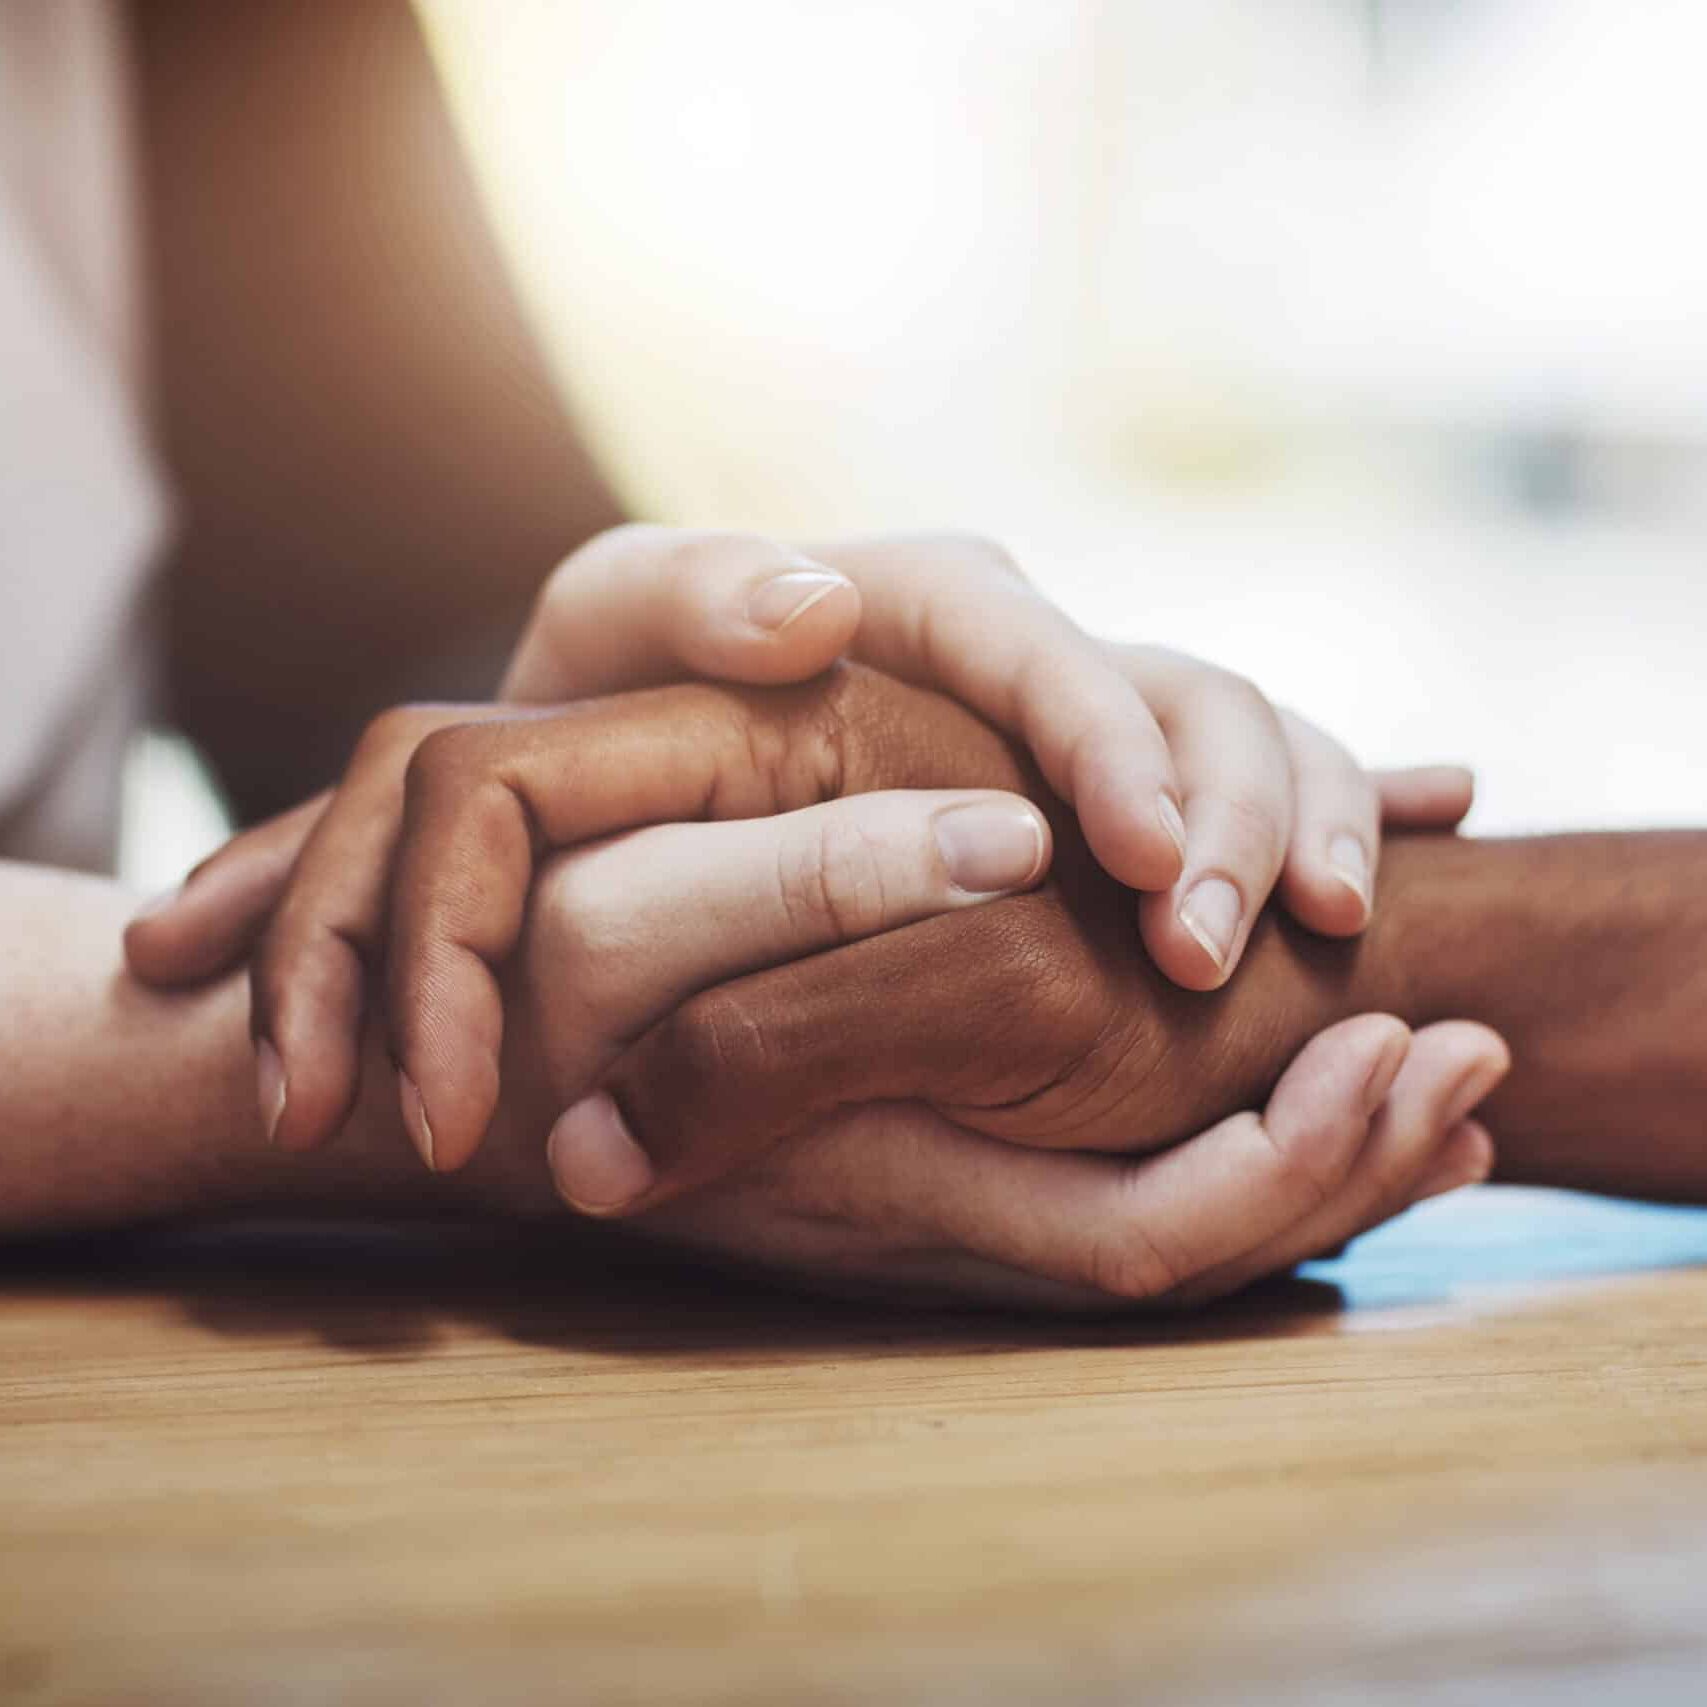 Support, compassion and trust while holding hands and sitting together at a table. Closeup of a loving, caring and interracial couple or friends comforting each other after a loss or cancer news.